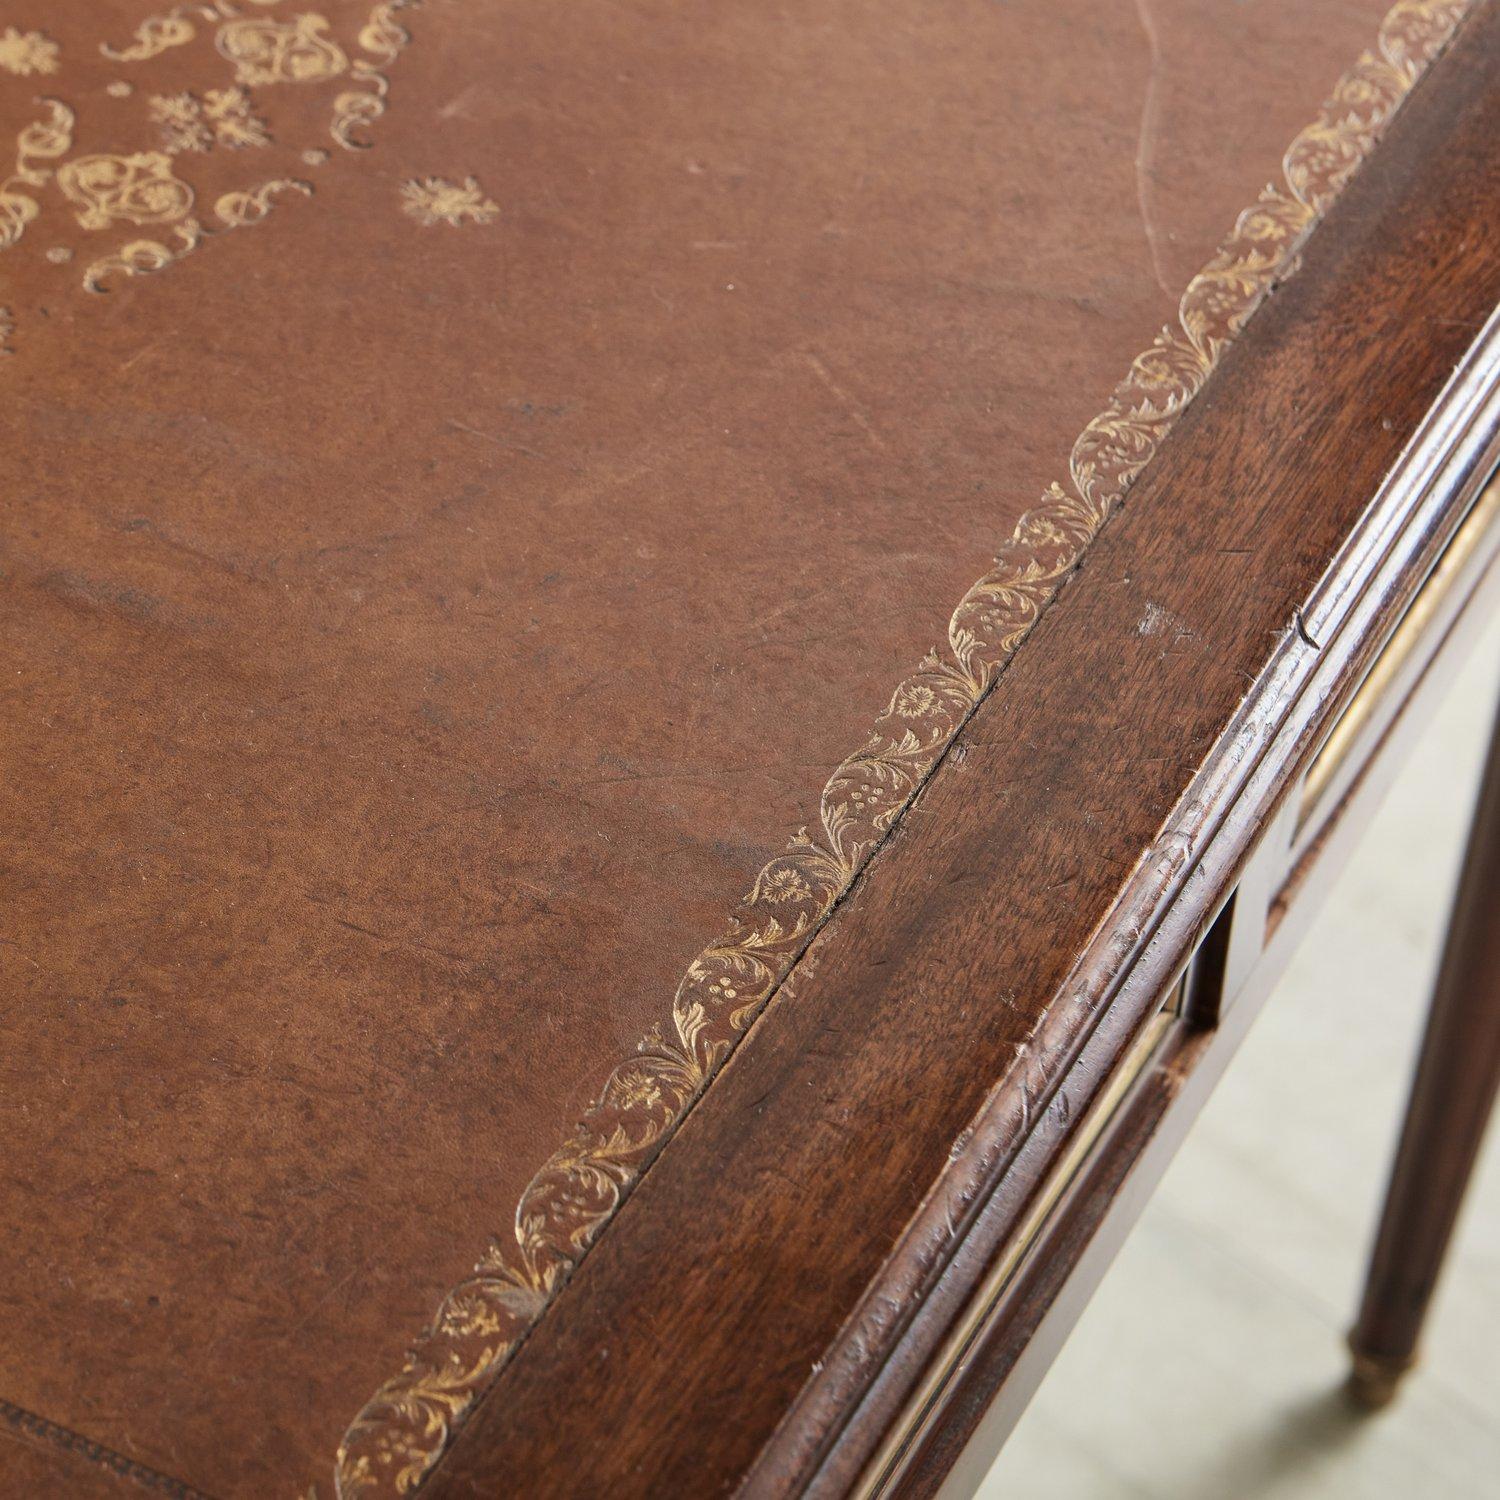 Mahogany Desk With Inlaid Leather Top and Gold Leaf Details, Early 20th Century 4